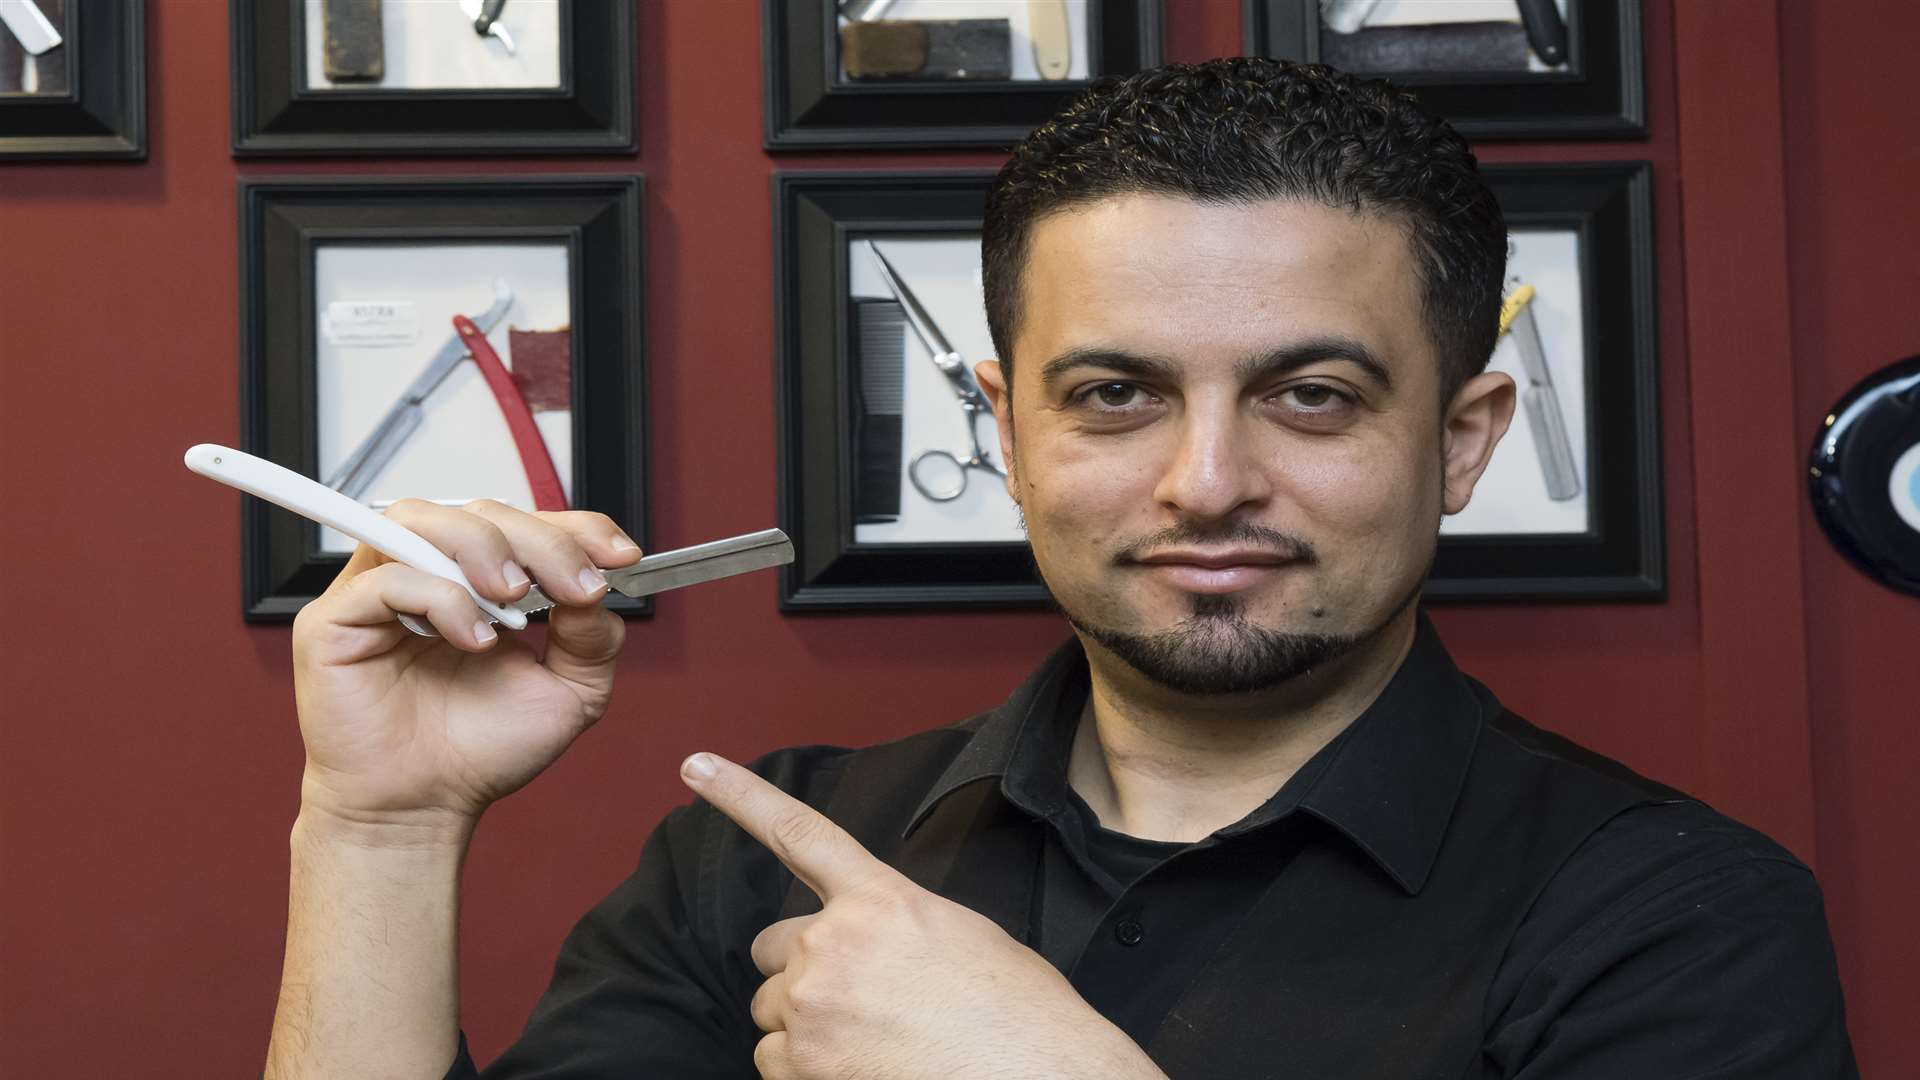 Efe Yeshibulut, of Kings Male Grooming, High Street, Deal, has won the regional finals of Britain's Best Wet Shave